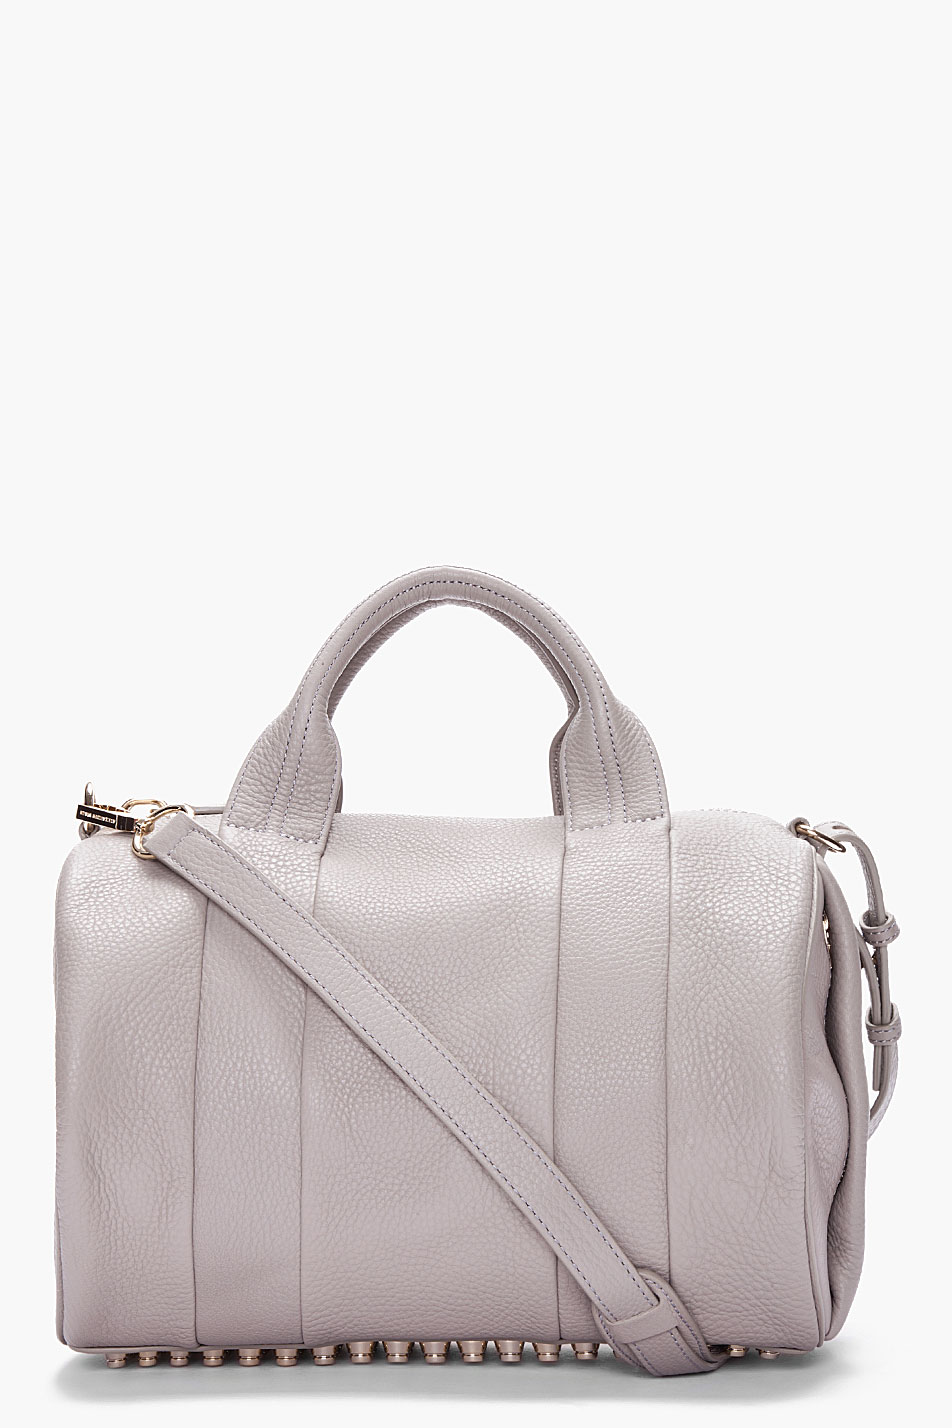 Alexander Wang Light Grey Leather Rocco Studded Duffle Bag in Gray ...